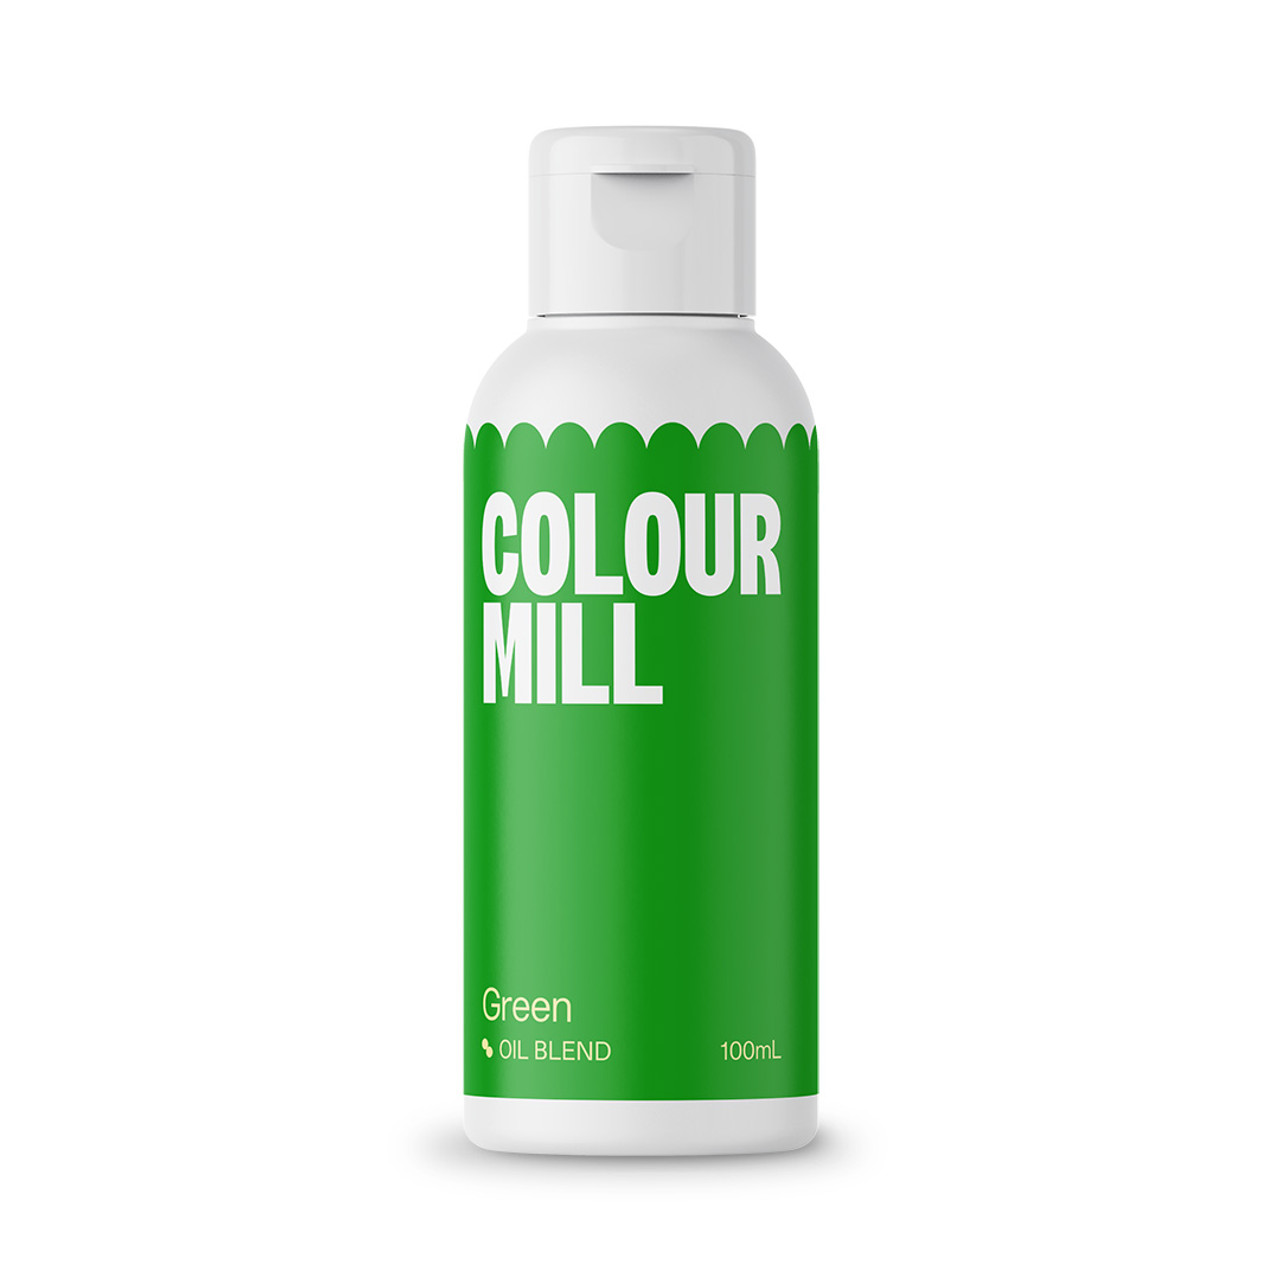 https://cdn11.bigcommerce.com/s-jcglkeji70/images/stencil/1280x1280/products/7221/22506/Colour-Mill-100ml-Oil-Based-Food-Colouring-Green__67340.1691760057.jpg?c=1